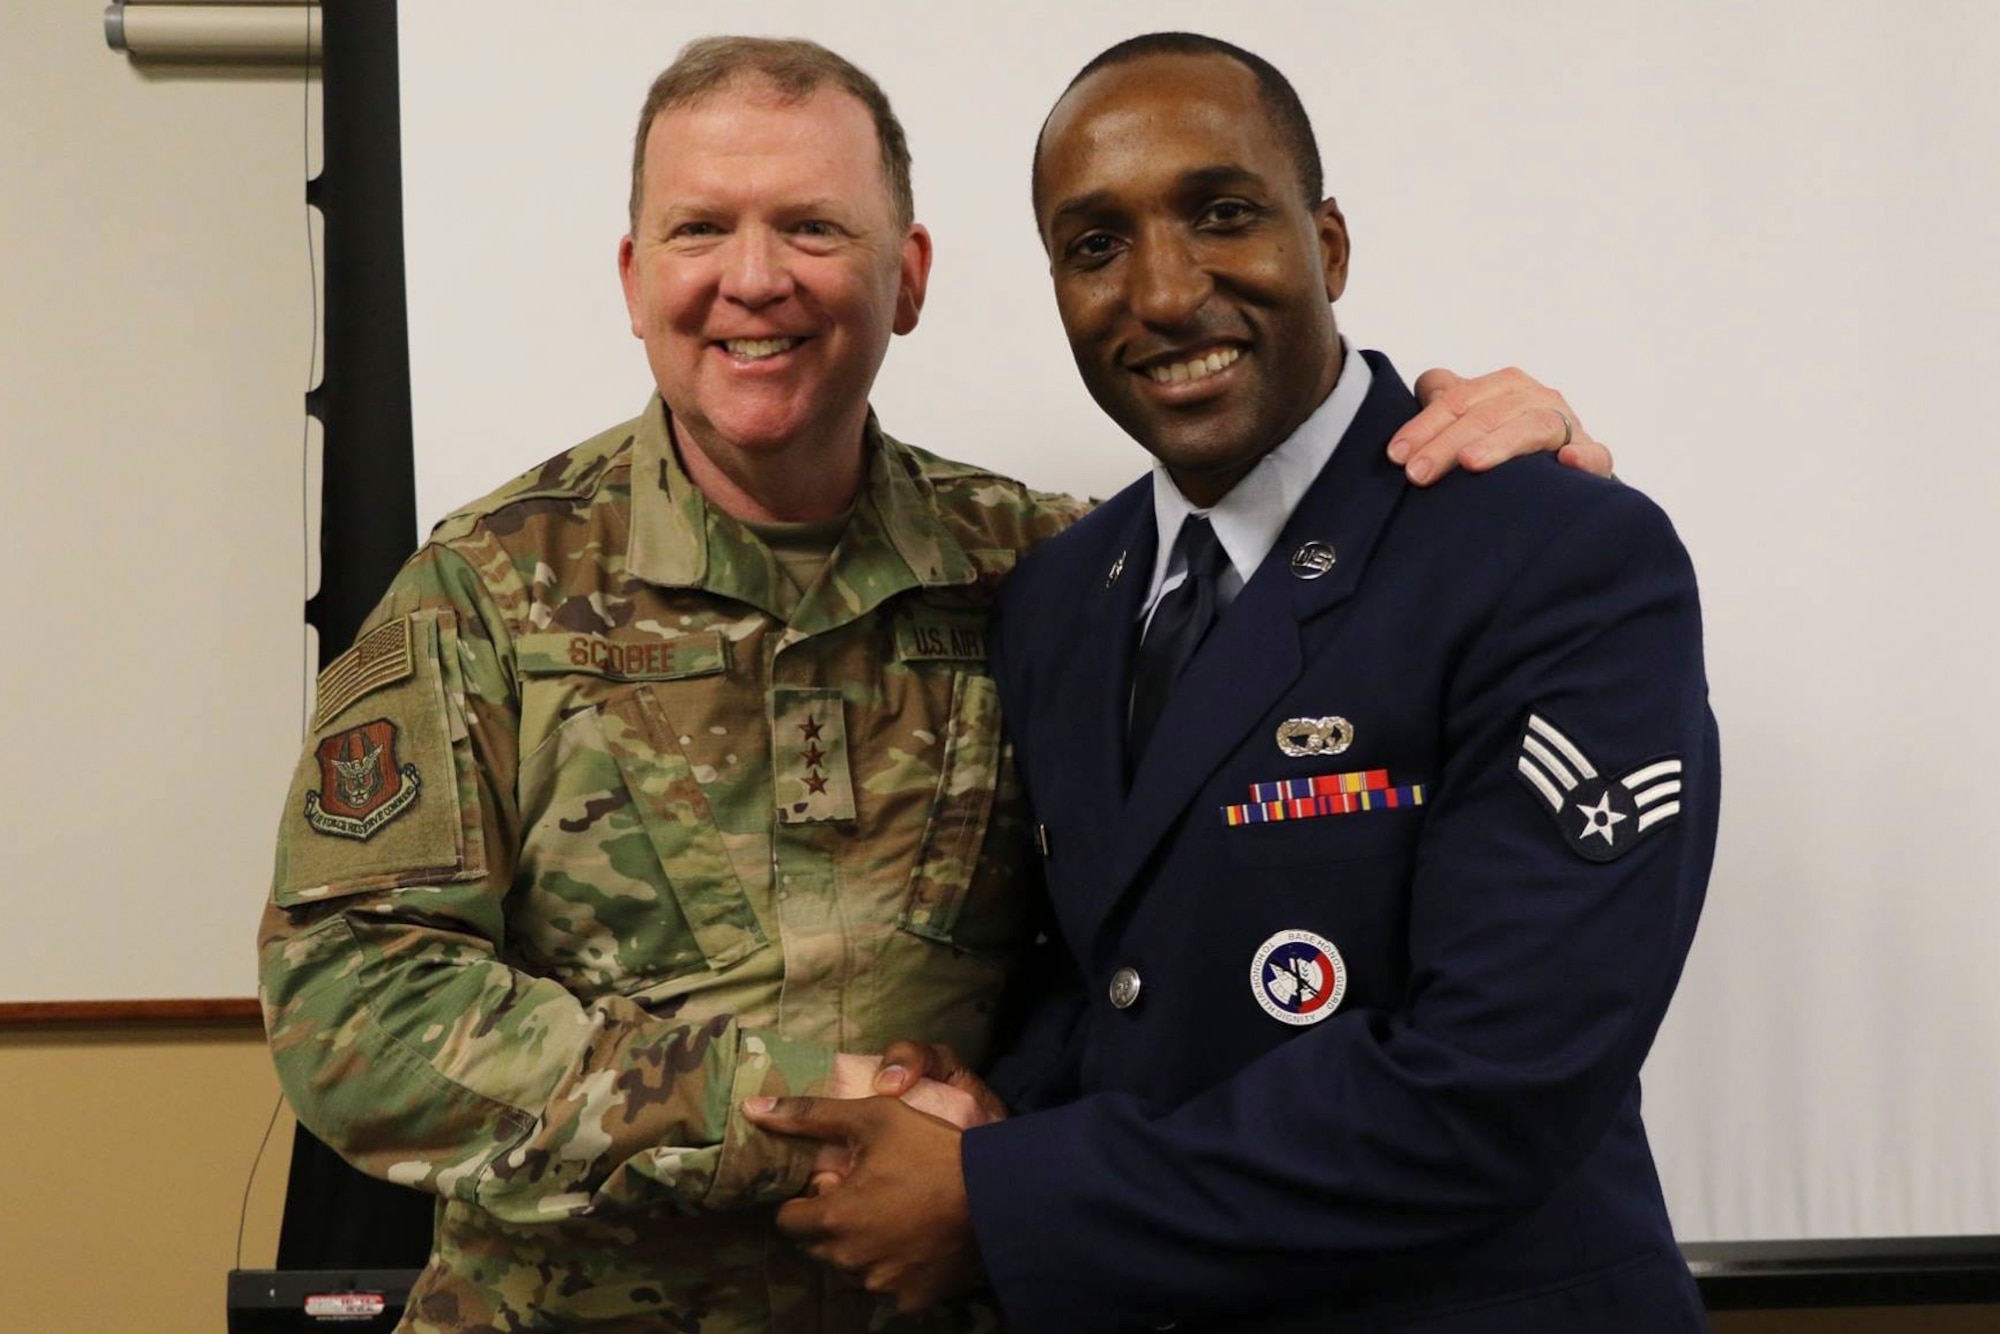 Lt. Gen. Richard W. Scobee, Commander, Air Force Reserve Command, shakes hands with a Senior Airman attached to the 452d Air Mobility Wing, March Air Reserve Base, California, during a visit to the base in April of 2019. (U.S. Air Force photo by 1st Lt. Russell McMillan)